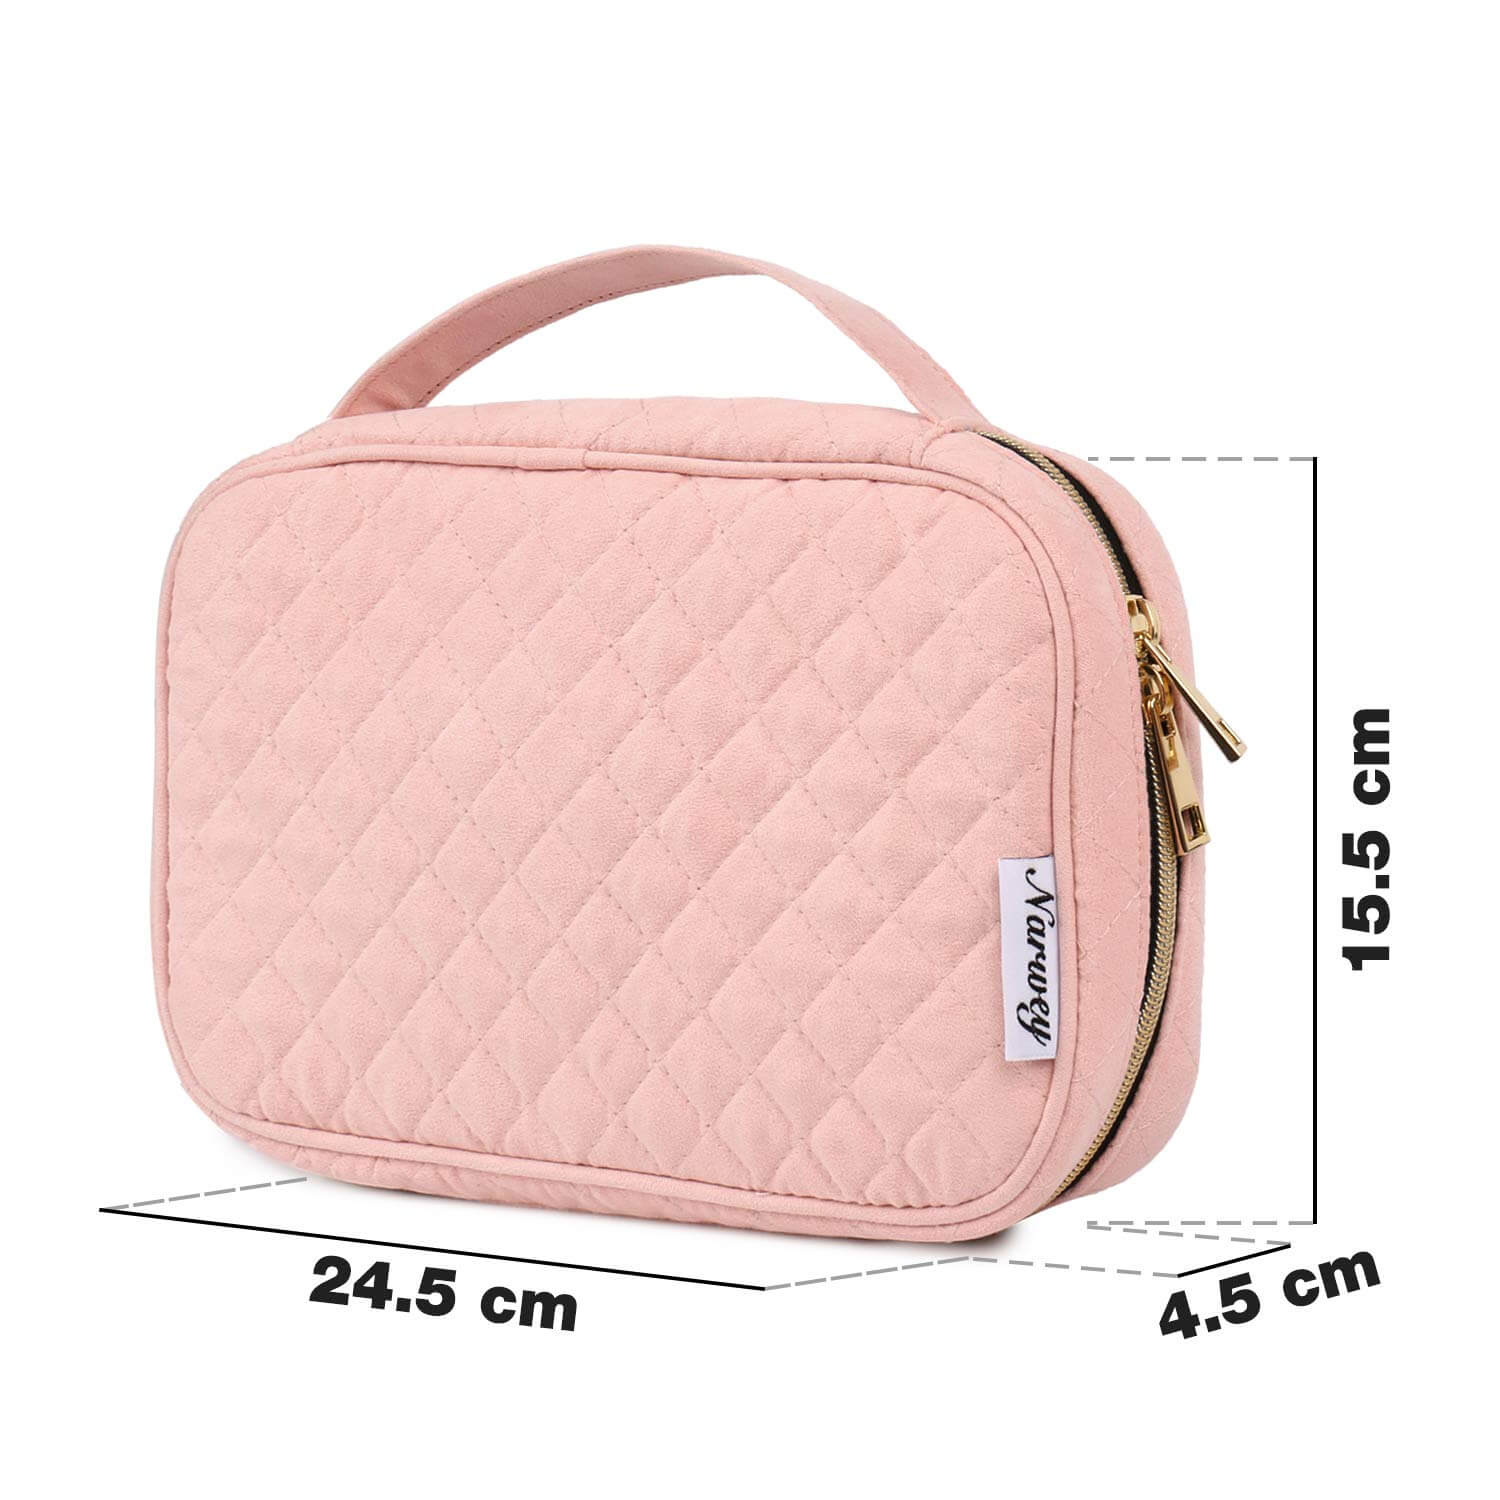 Christmas Clearance! Feltree Makeup Bag Pleated Wash Bag Travel Portable  Half Round Storage Bag, 6.29x2.55x4.72in